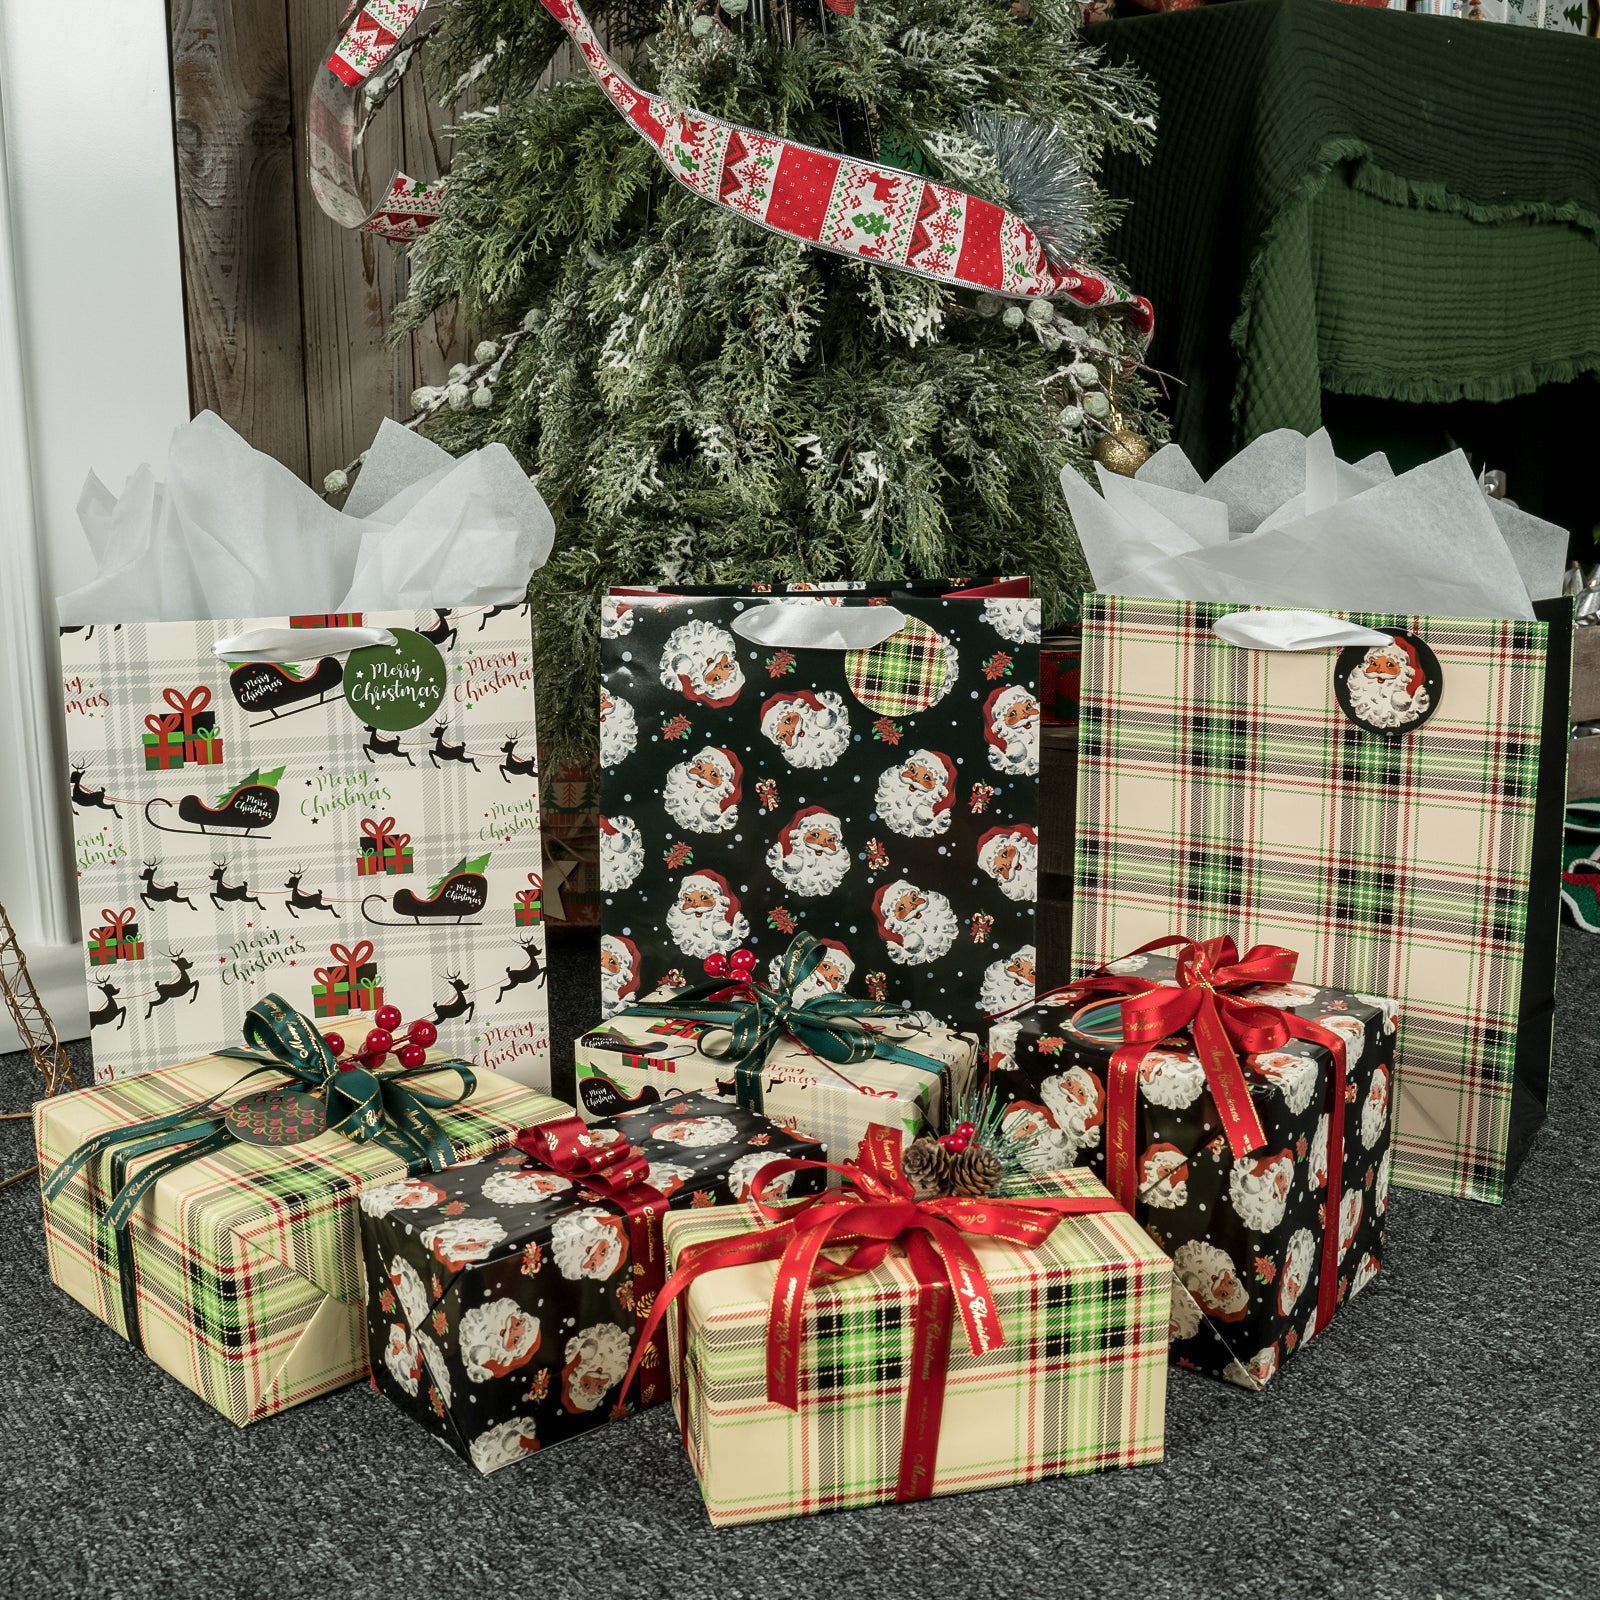 Assort Large Christmas Gift Bag Plaid 9 Pack 10x5x13 inch